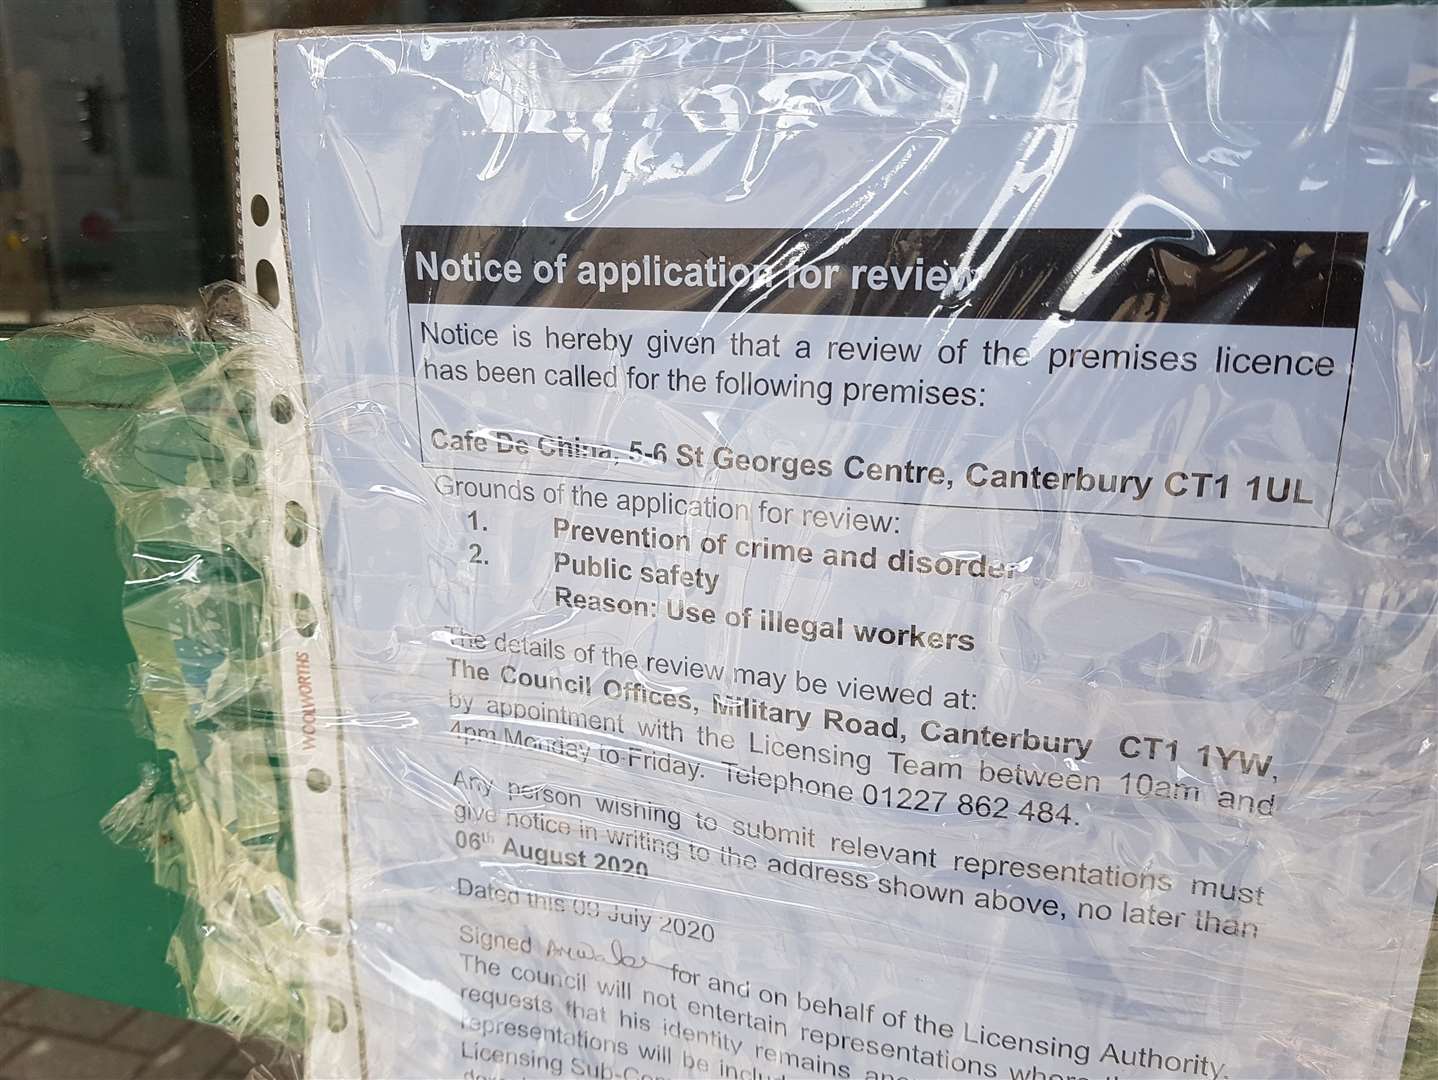 The notice of application for review on Cafe de China's door